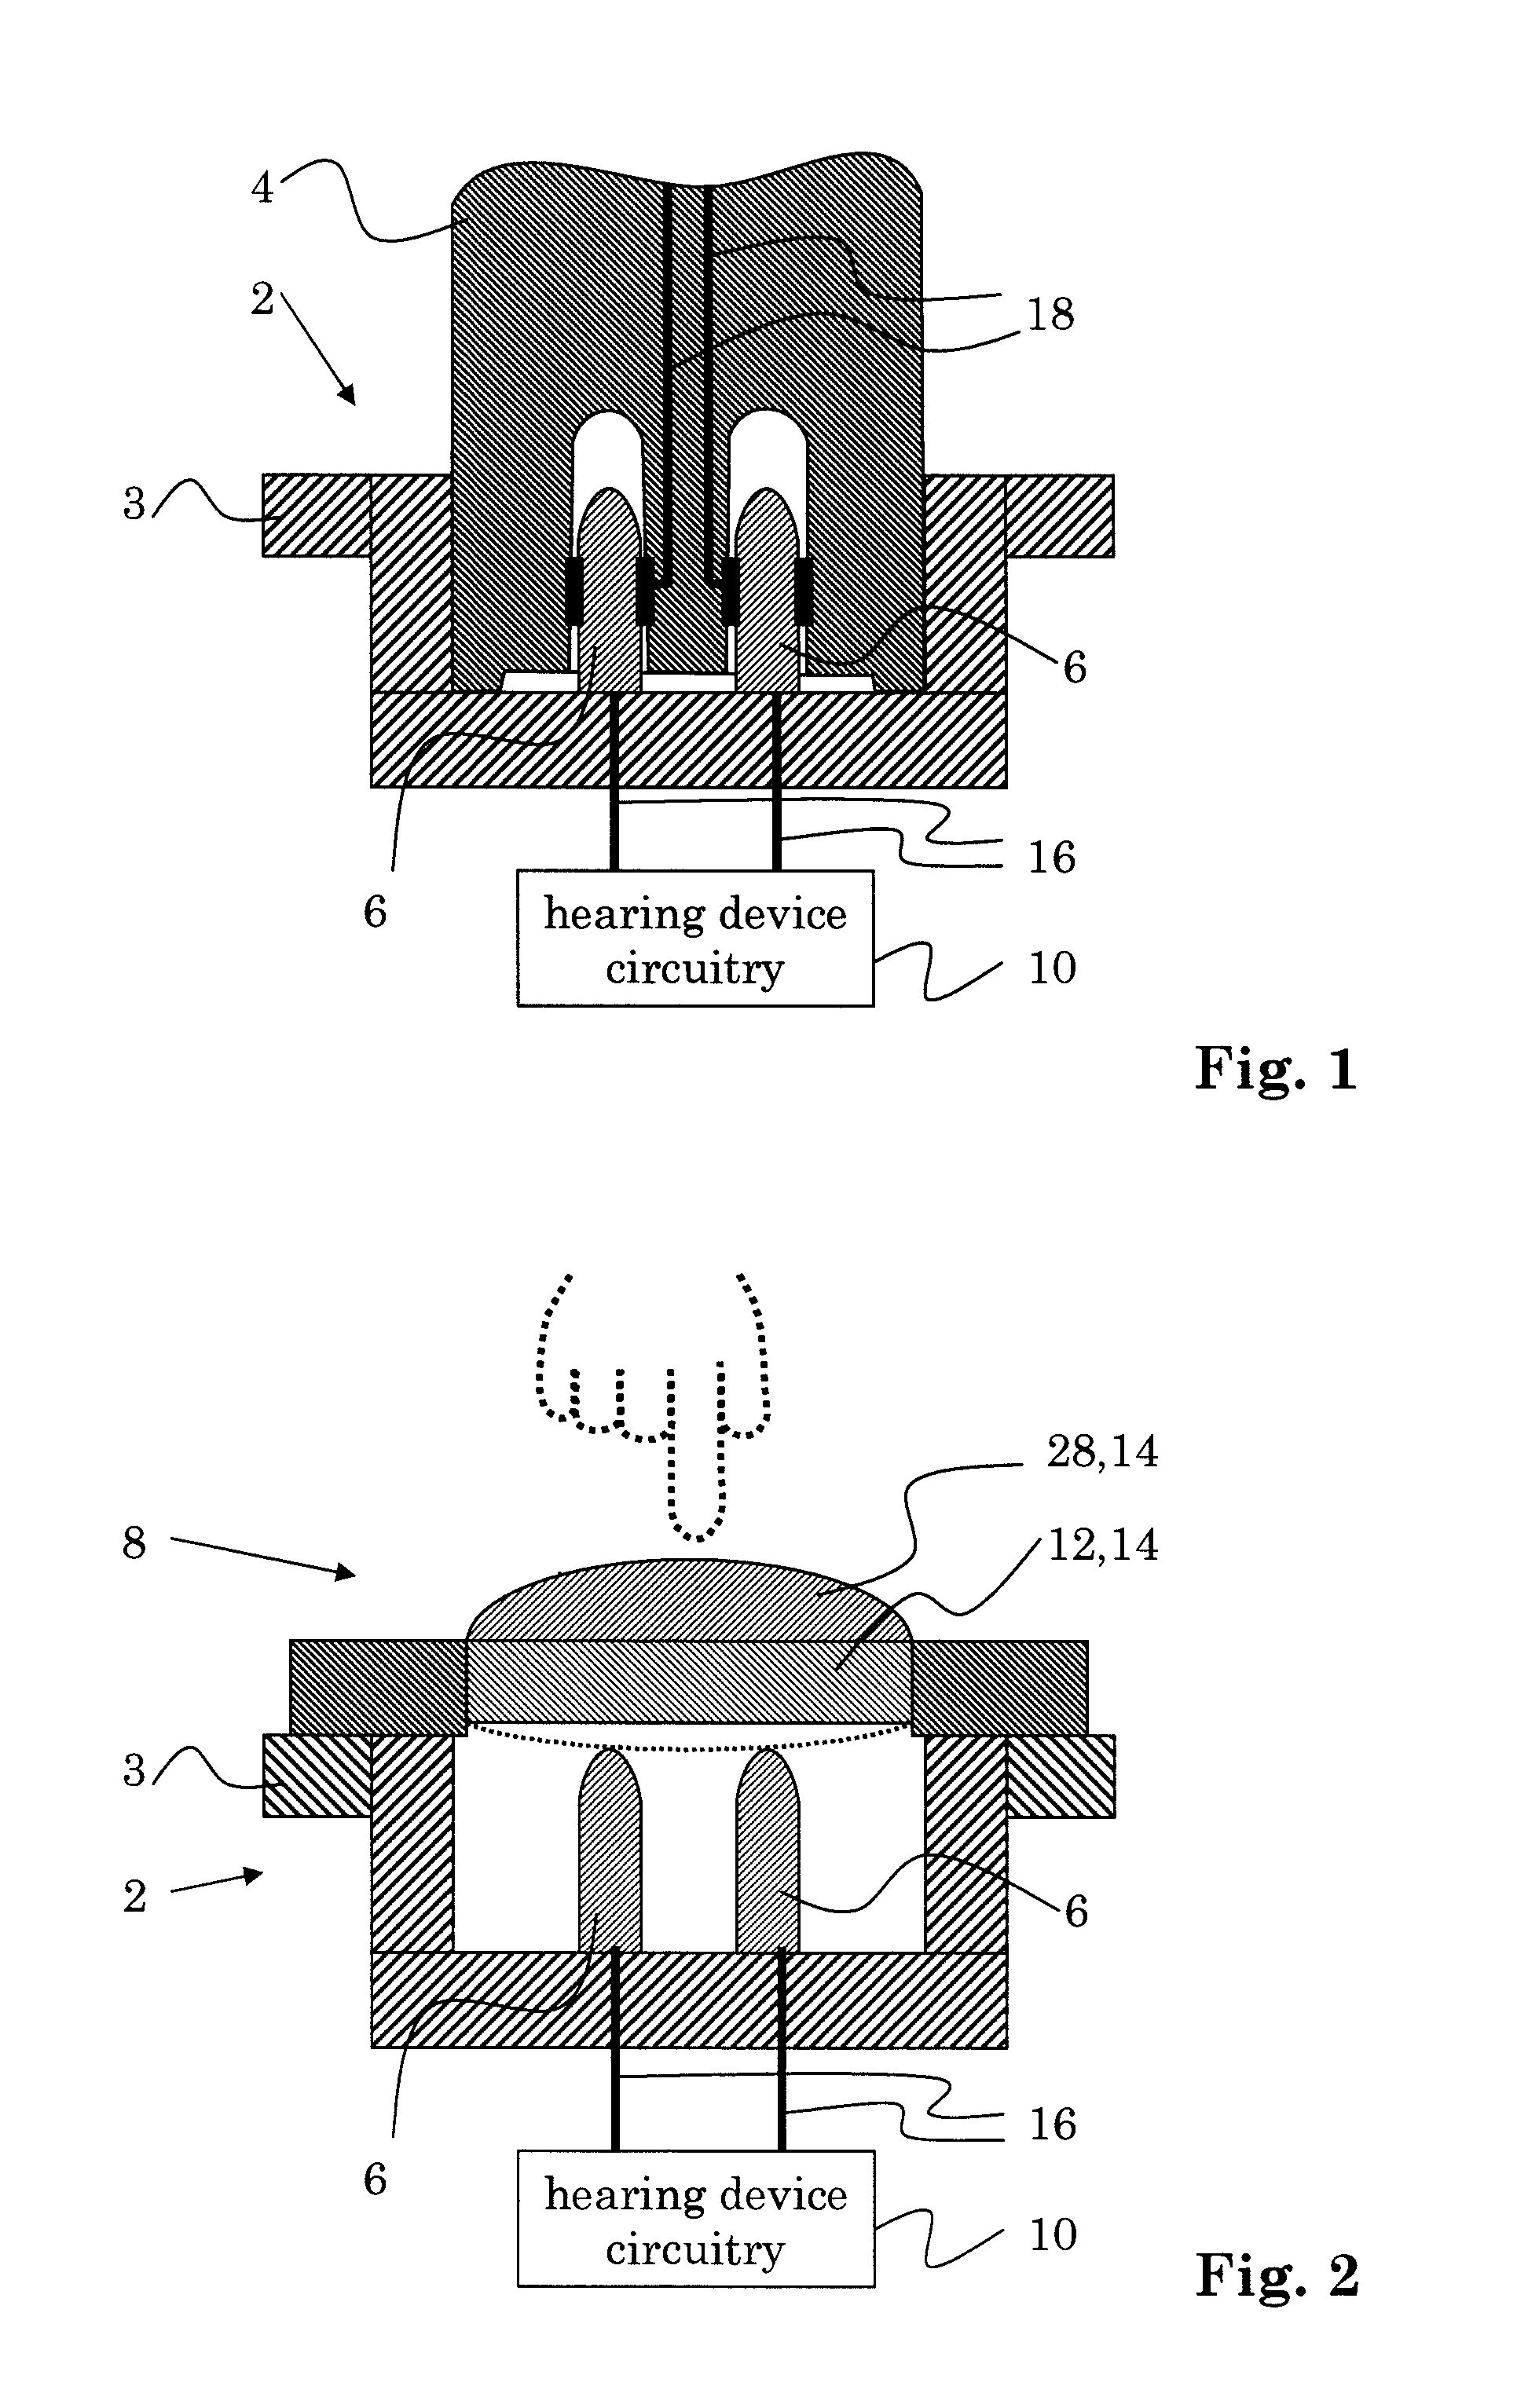 Hearing device with user control